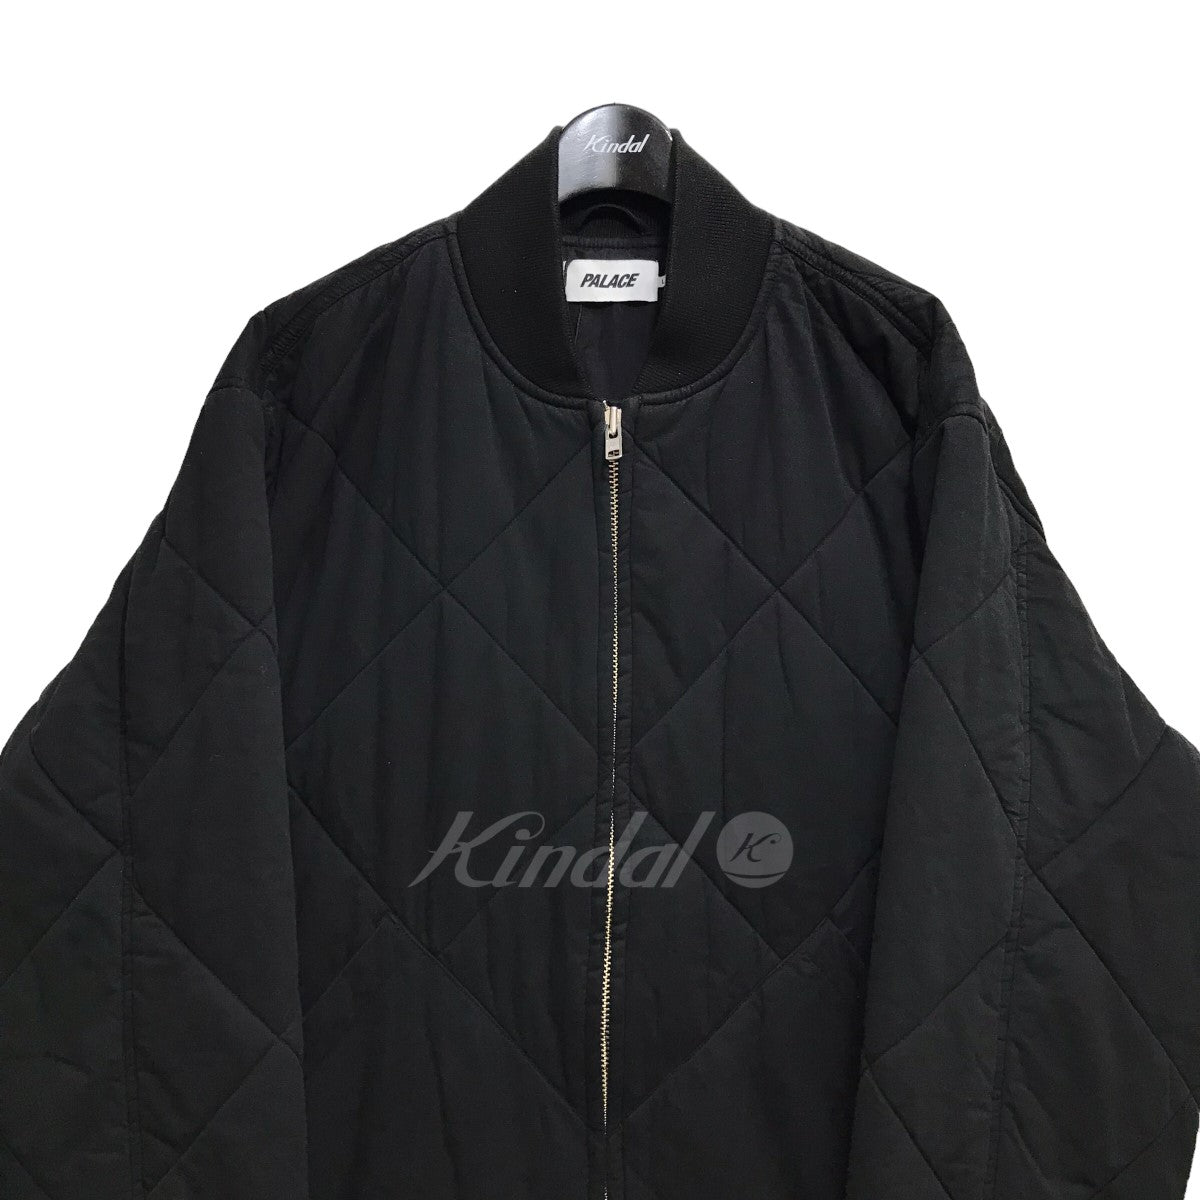 PALACE 24ss D-QUILT BOMBER Black Sサイズ | camillevieraservices.com